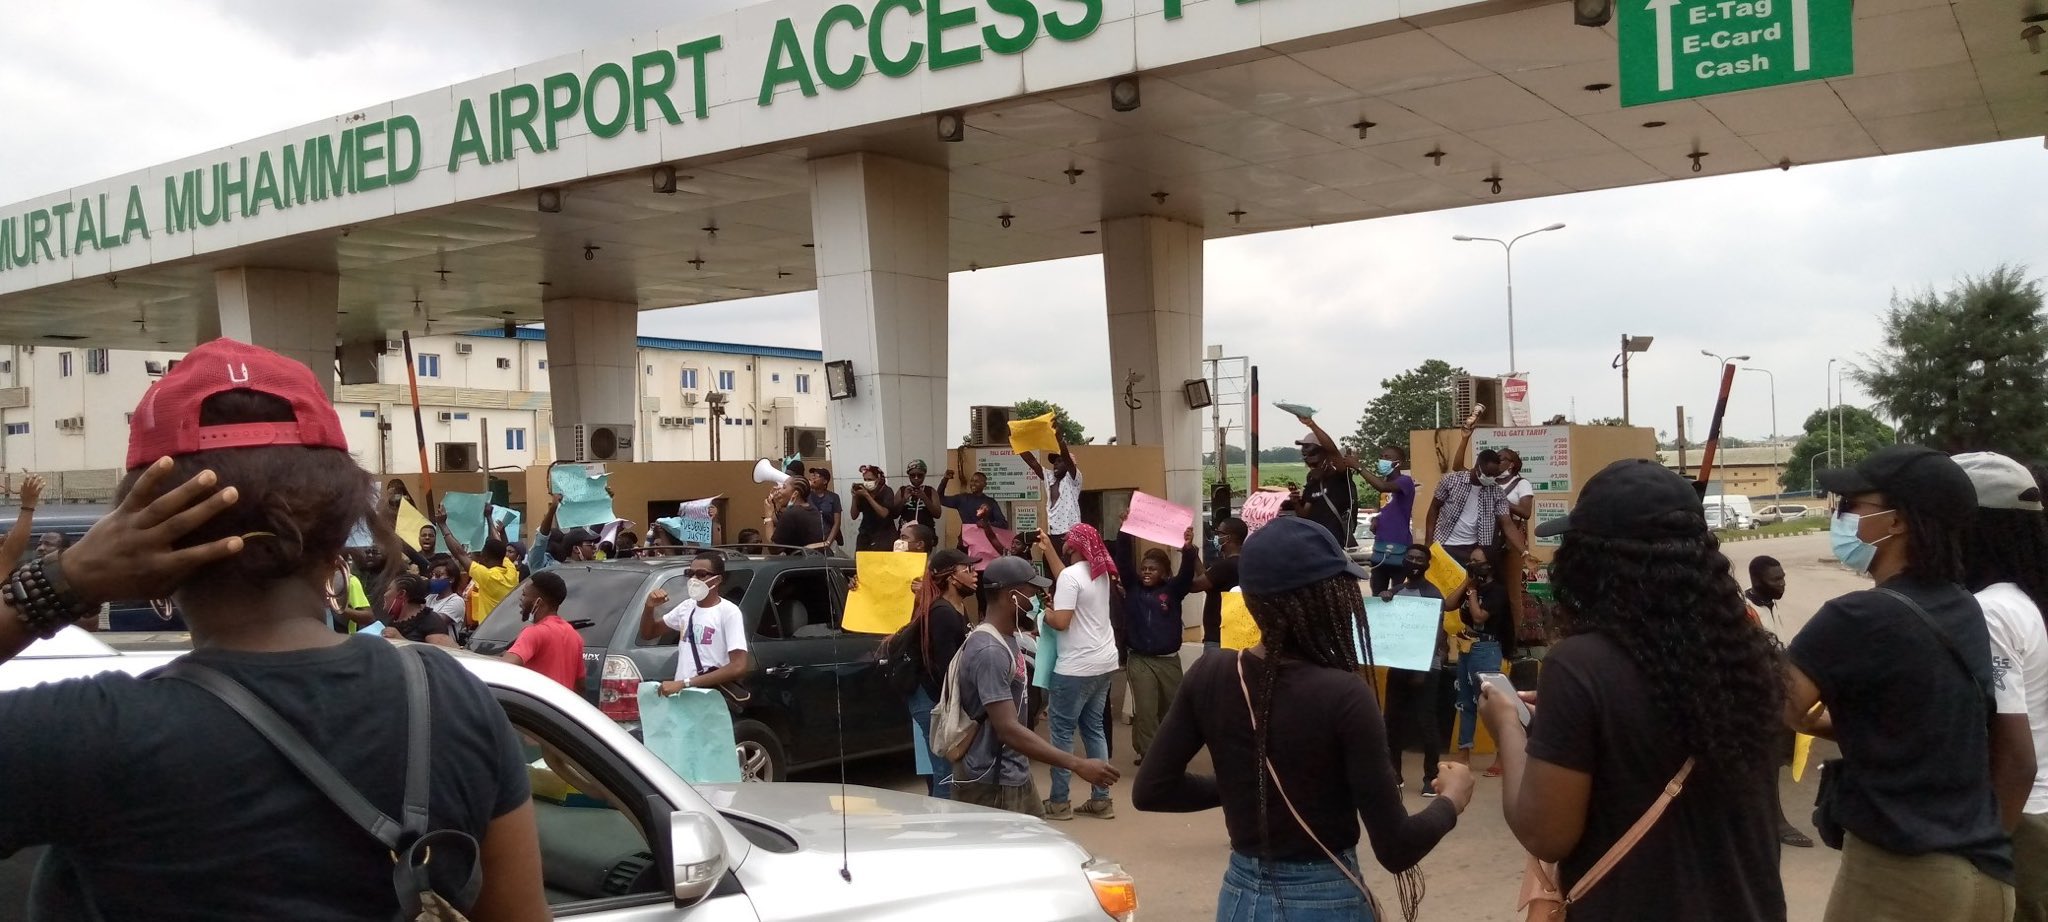 #EndSARS protesters break into Lagos airport, ground activities